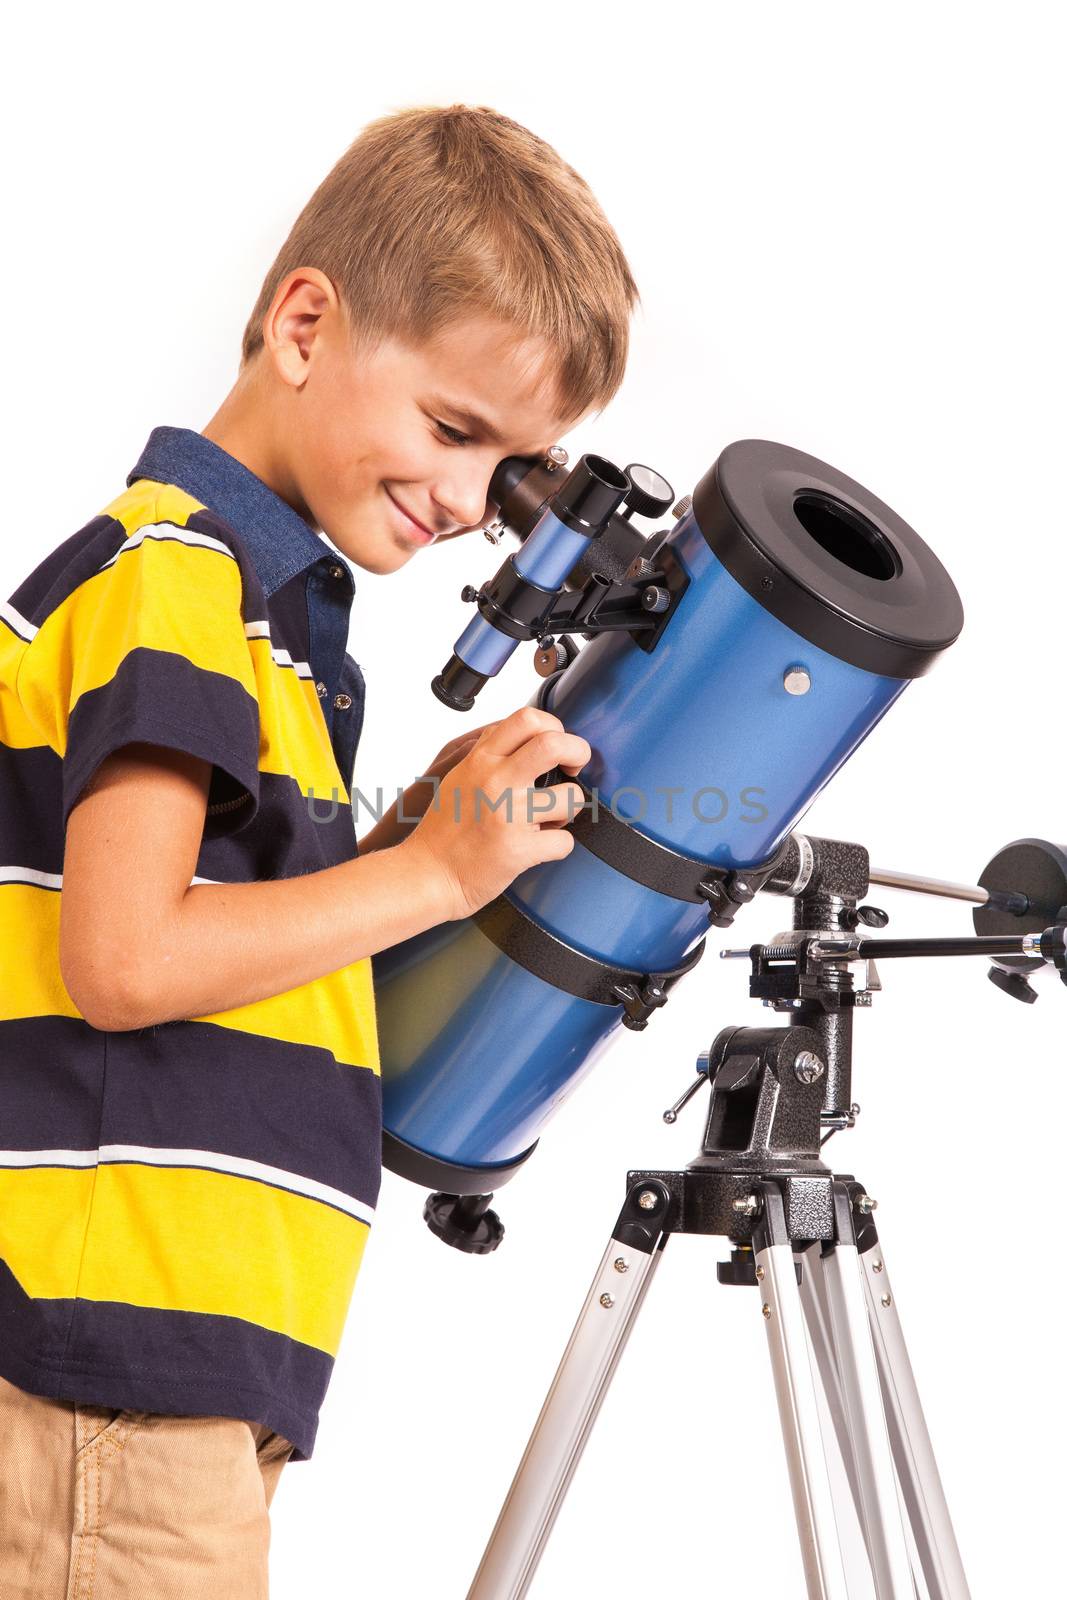 Child Looking Into Telescope on white by bloodua